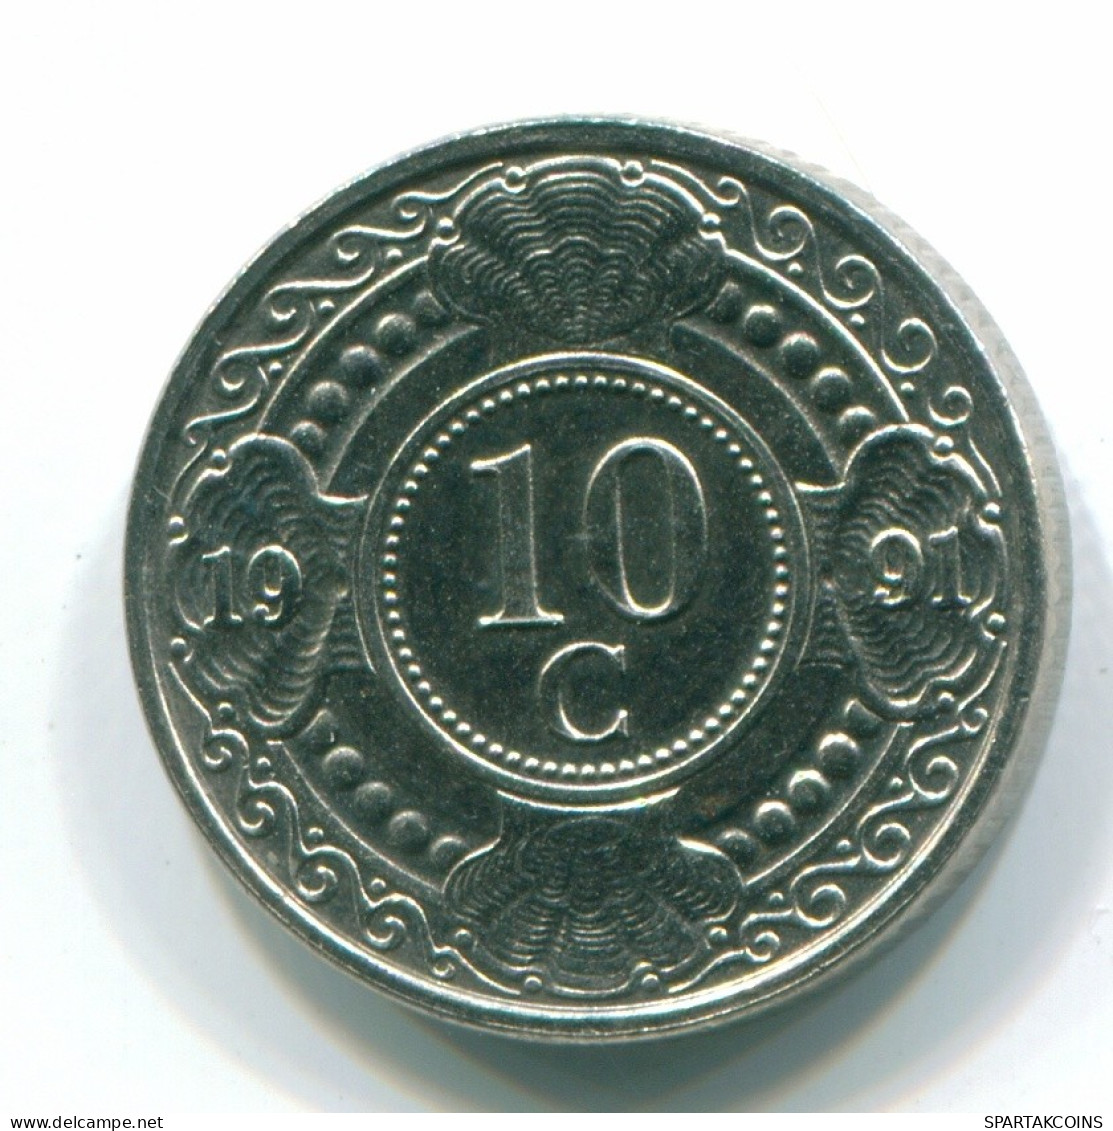 10 CENTS 1991 NETHERLANDS ANTILLES Nickel Colonial Coin #S11320.U.A - Antille Olandesi